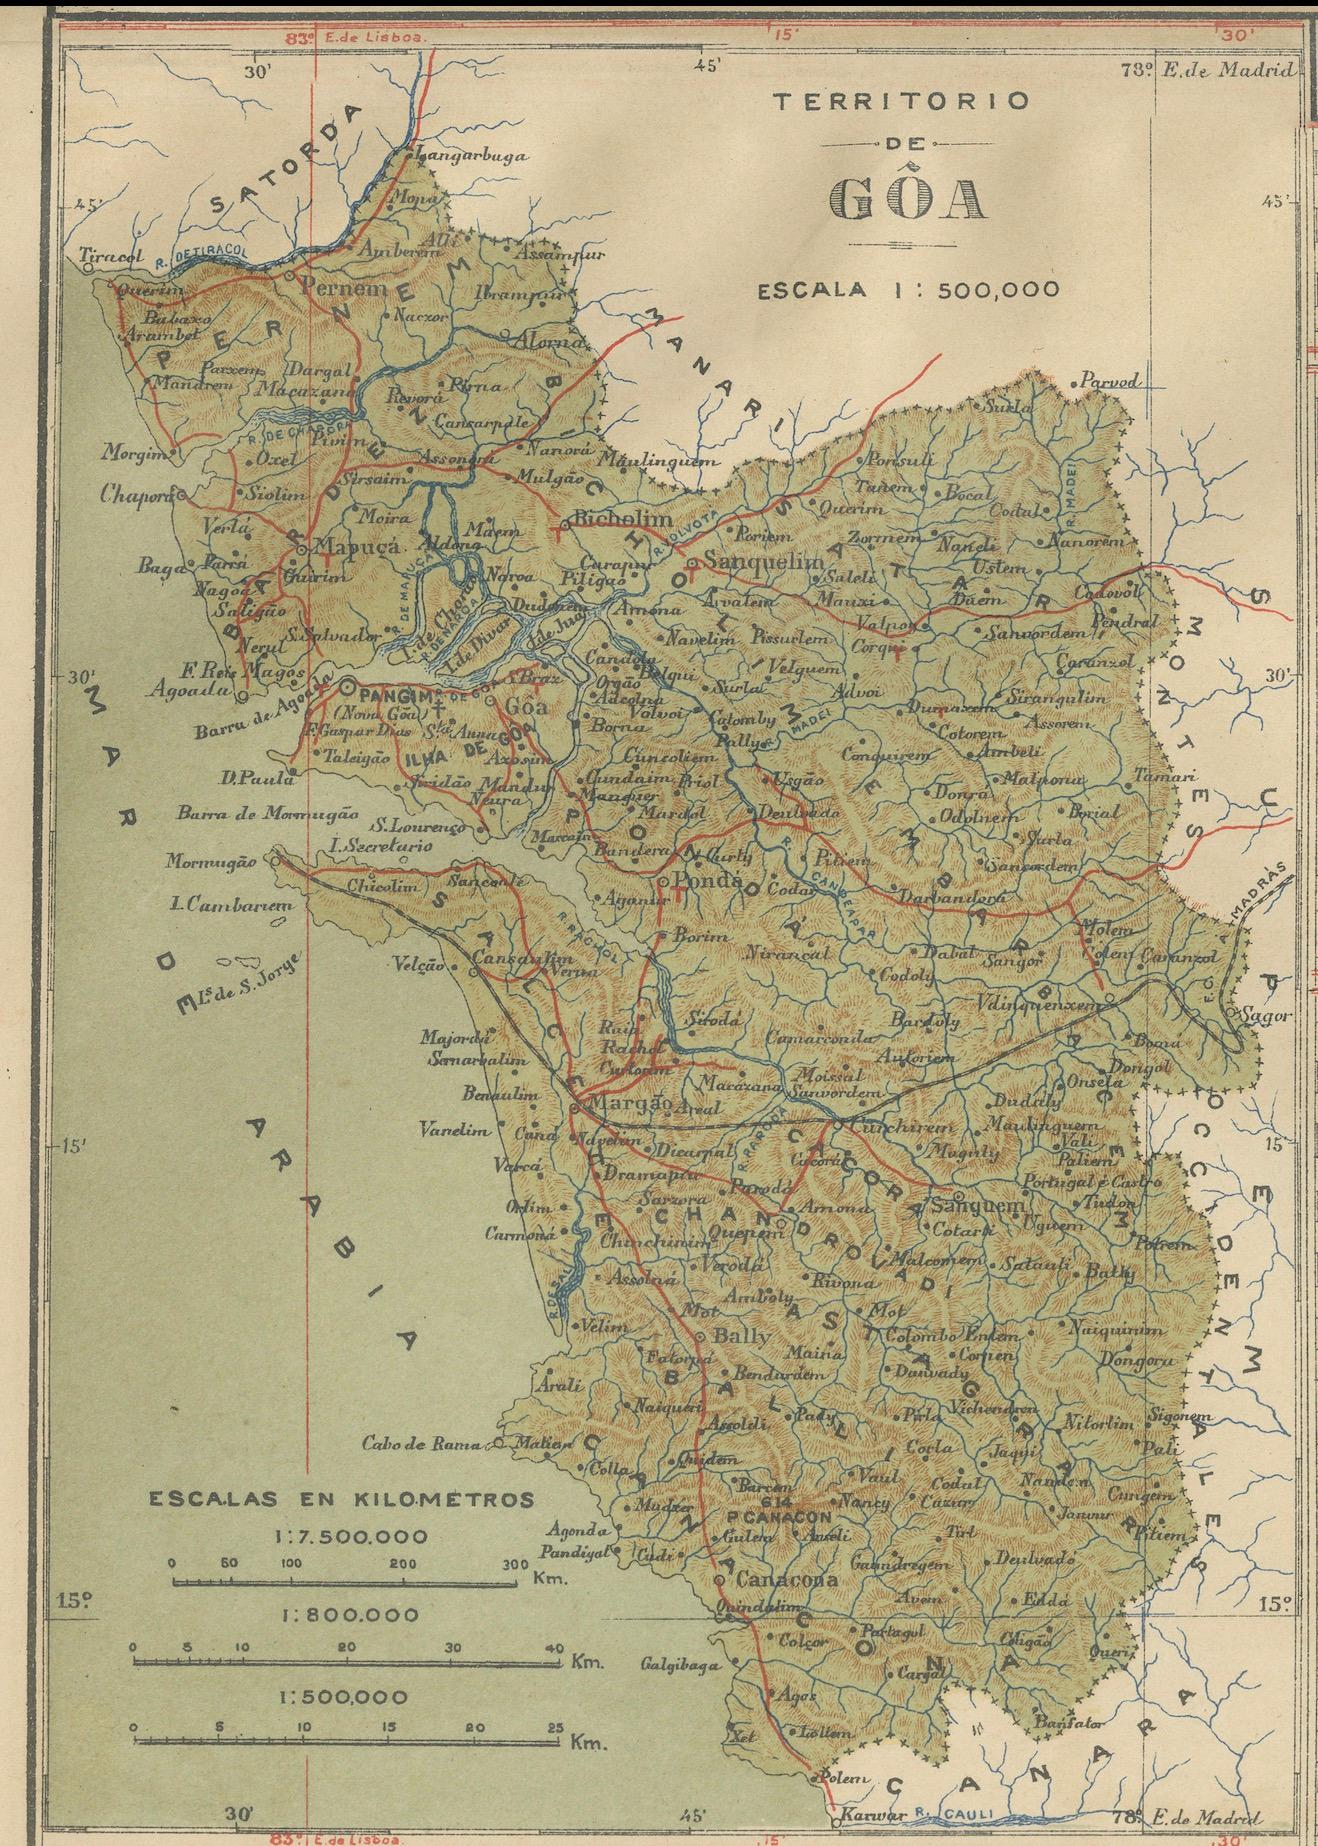 This map is an original antique map that showcases Portuguese possessions around the turn of the 20th century, with a focus on Guinea-Bissau (referred to on the map as 